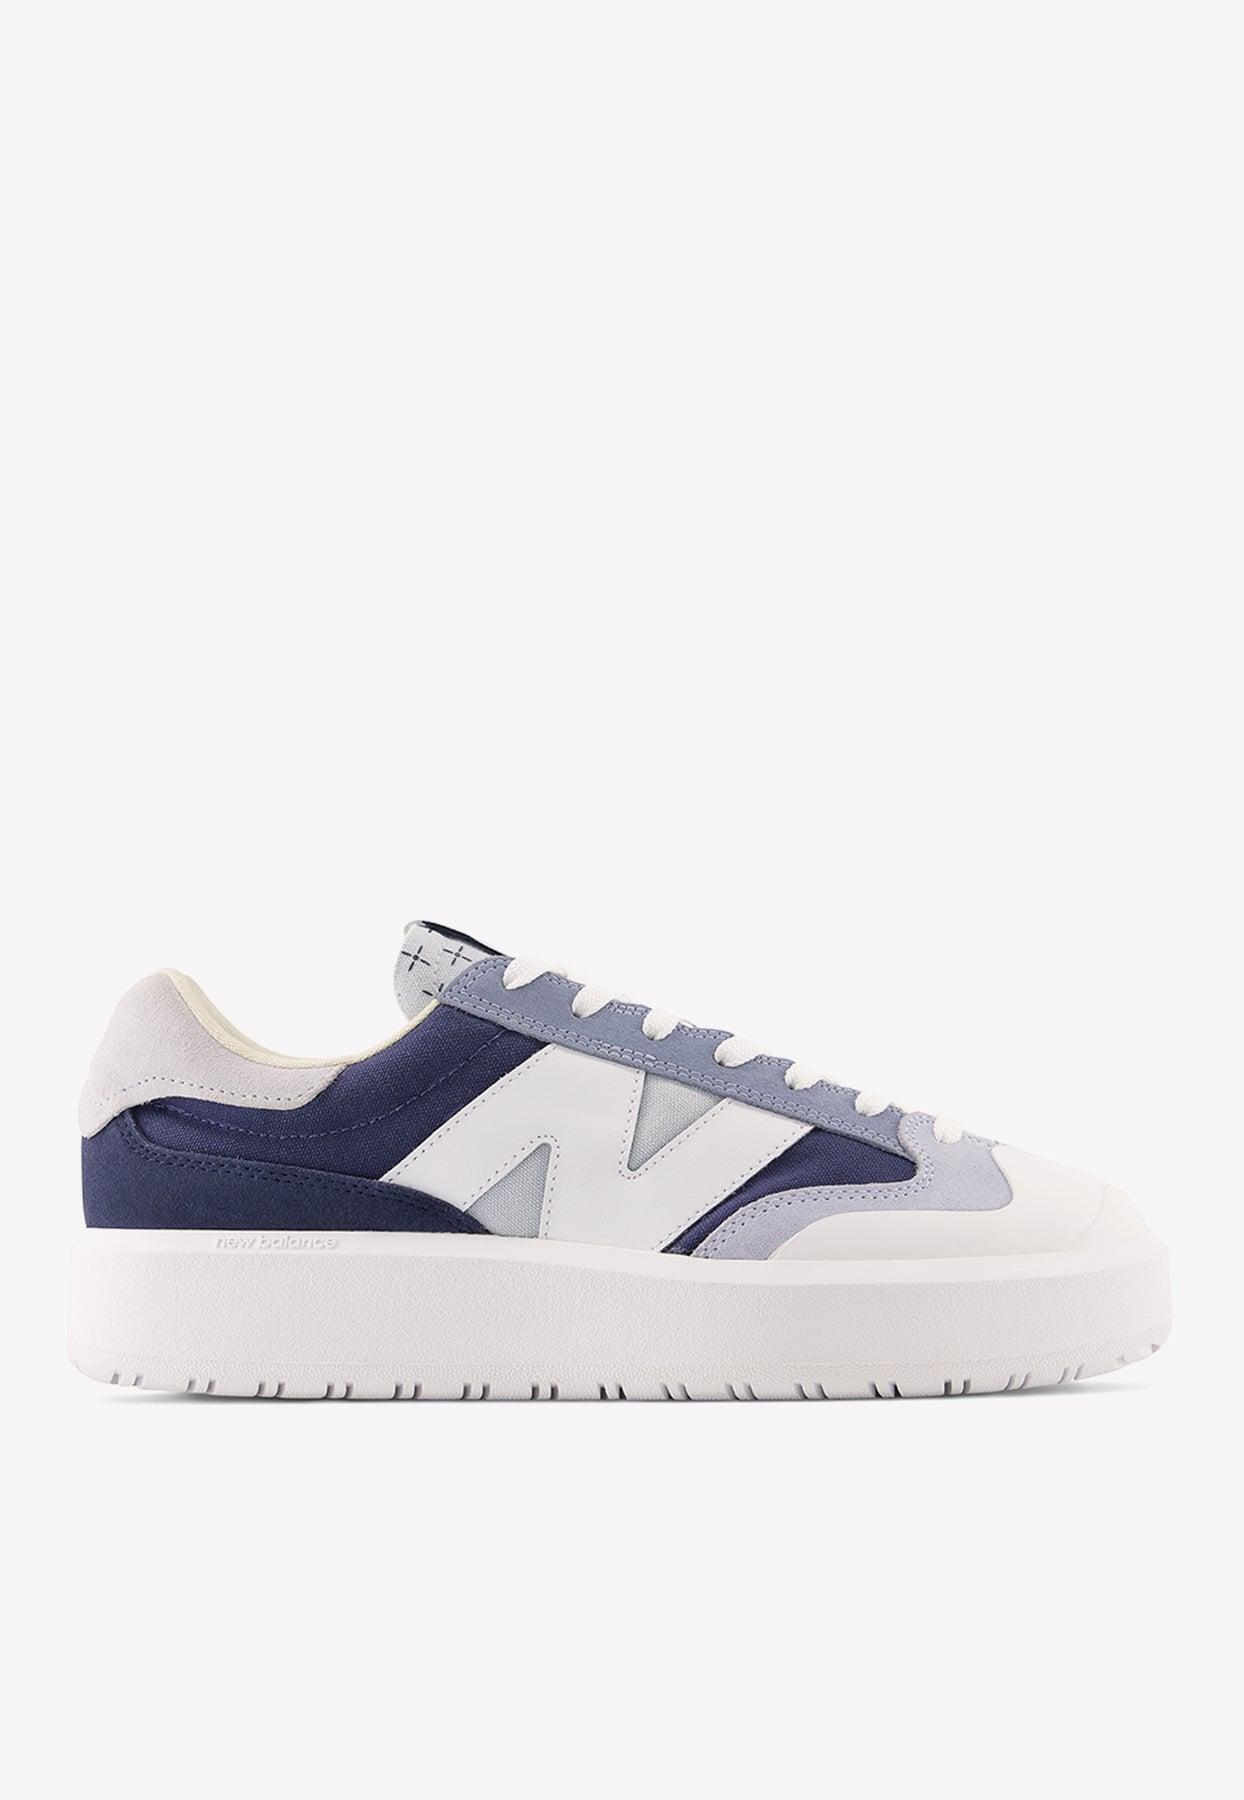 New Balance Ct302 Low-top Sneakers In Vintage Indigo With Dusk Blue for ...